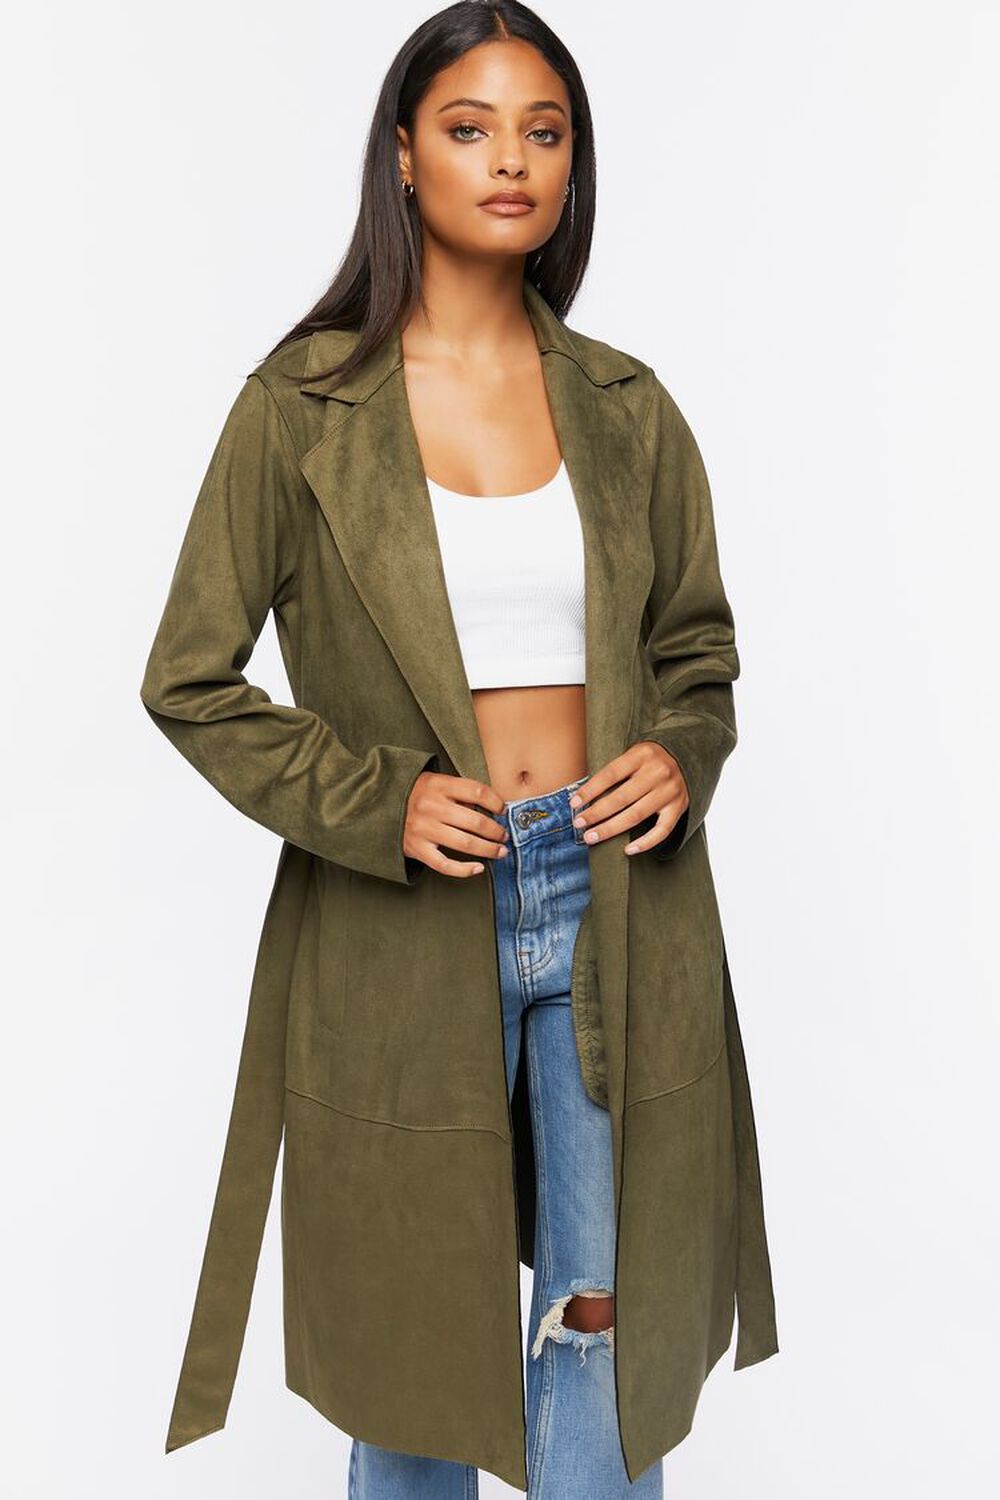 Faux Suede Shearling Embroidered Coat - Camel